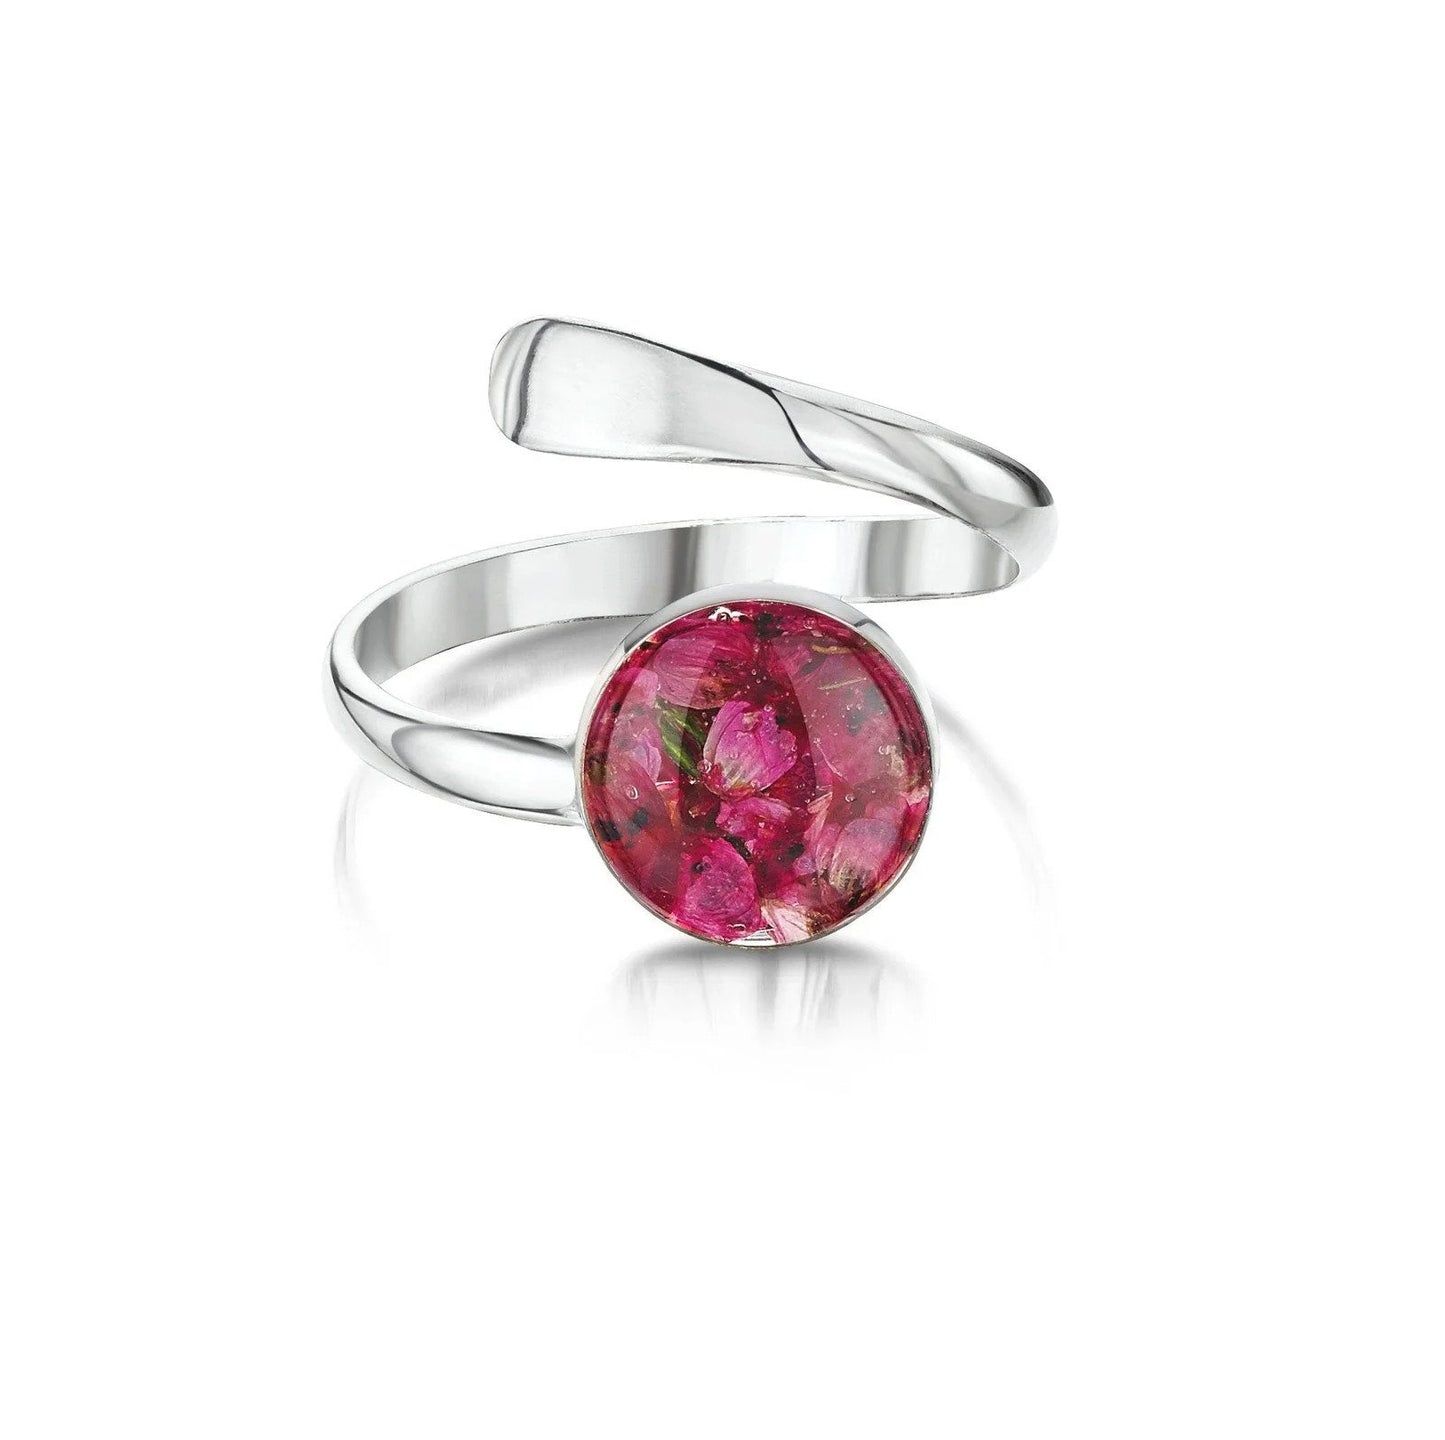 Sterling Silver Adjustable Ring with real heather flowers